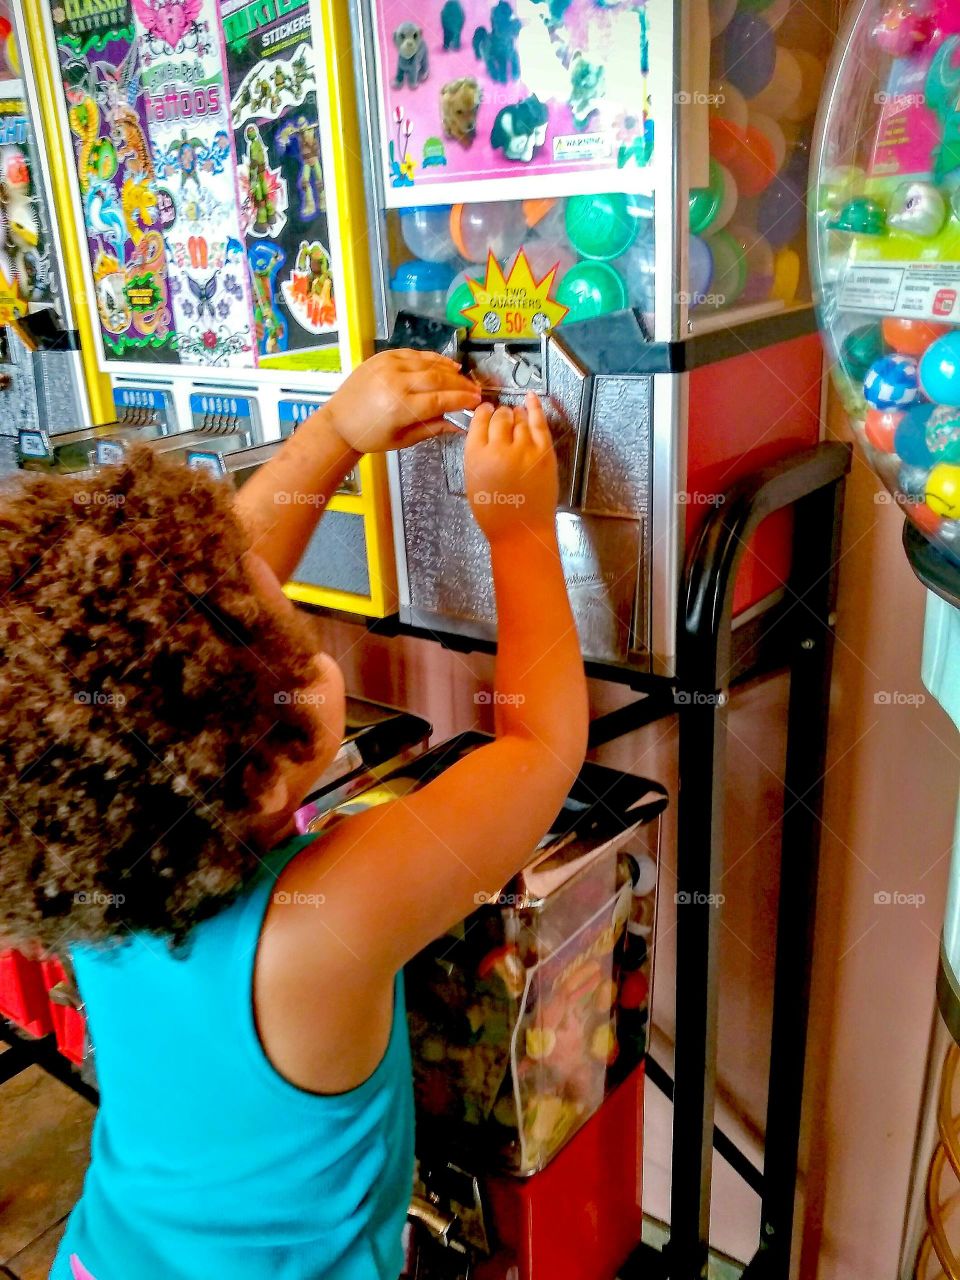 Little girl getting prize out of a Gumball Machine.